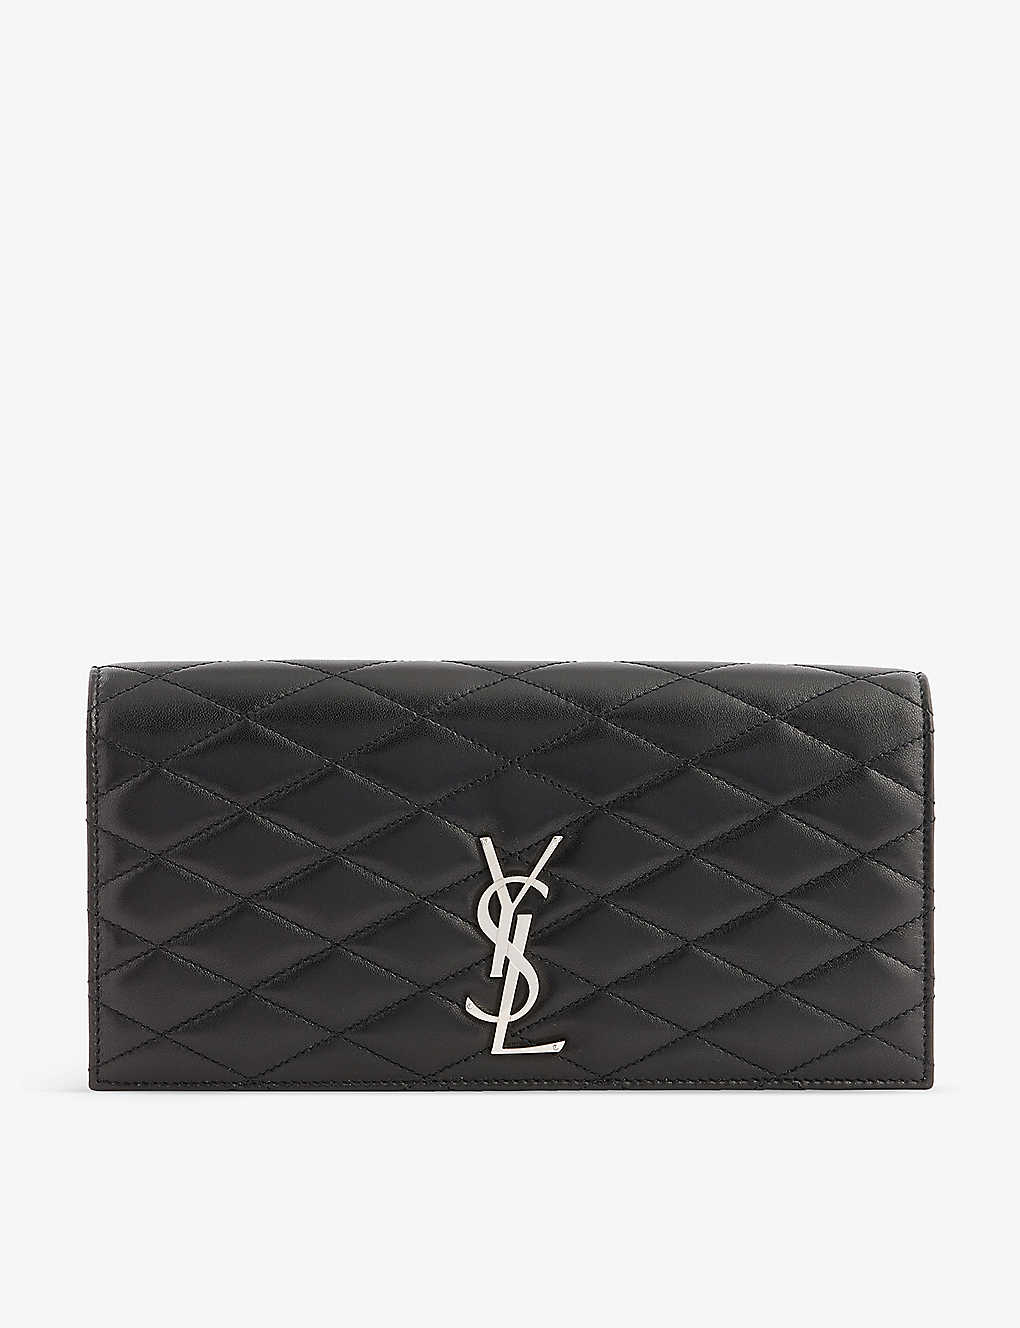 Saint Laurent Womens Black Kate Quilted Leather Clutch Bag